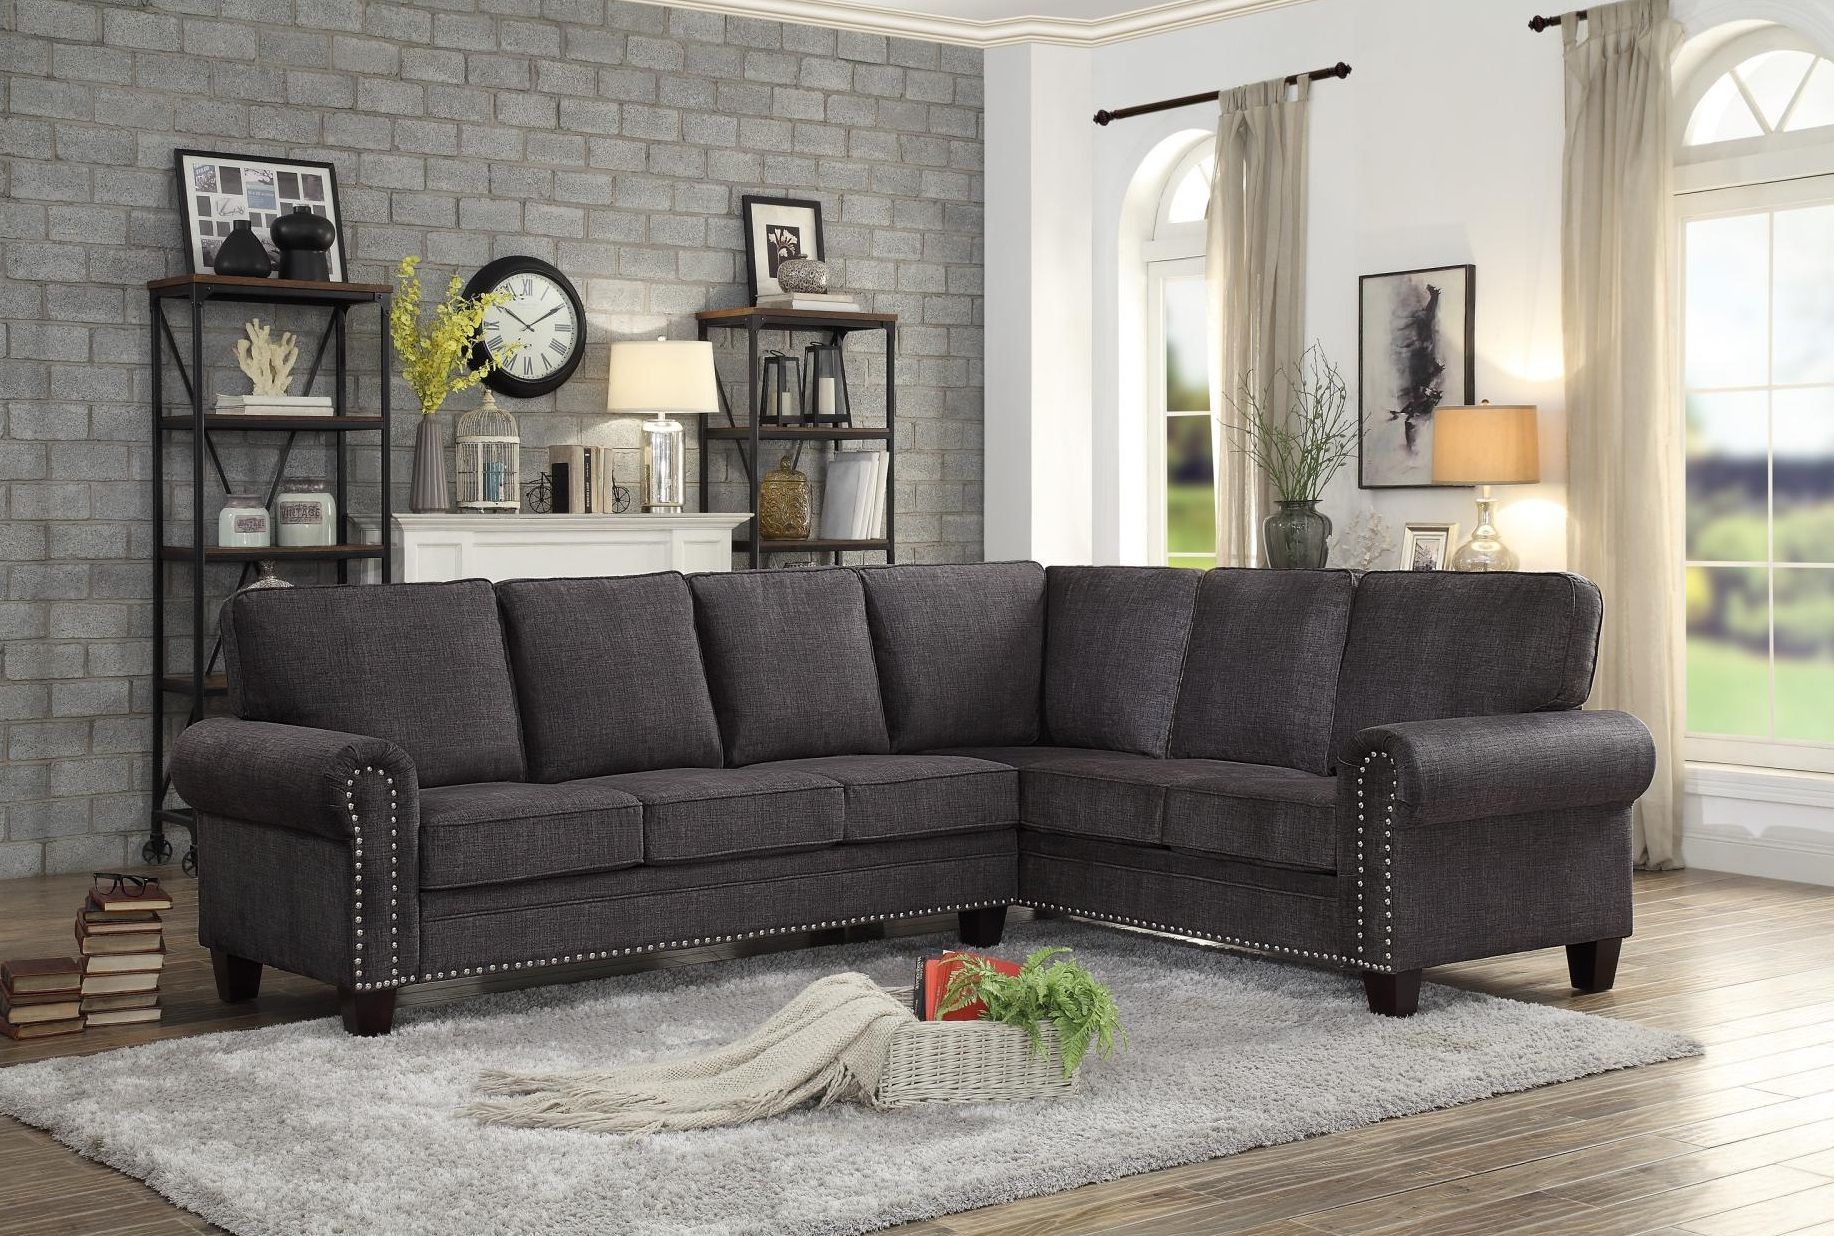 Cornelia Dark Grey Sectional (with Images) | Fabric Sectional Sofas With Regard To Dark Gray Sectional Sofas (Gallery 13 of 20)